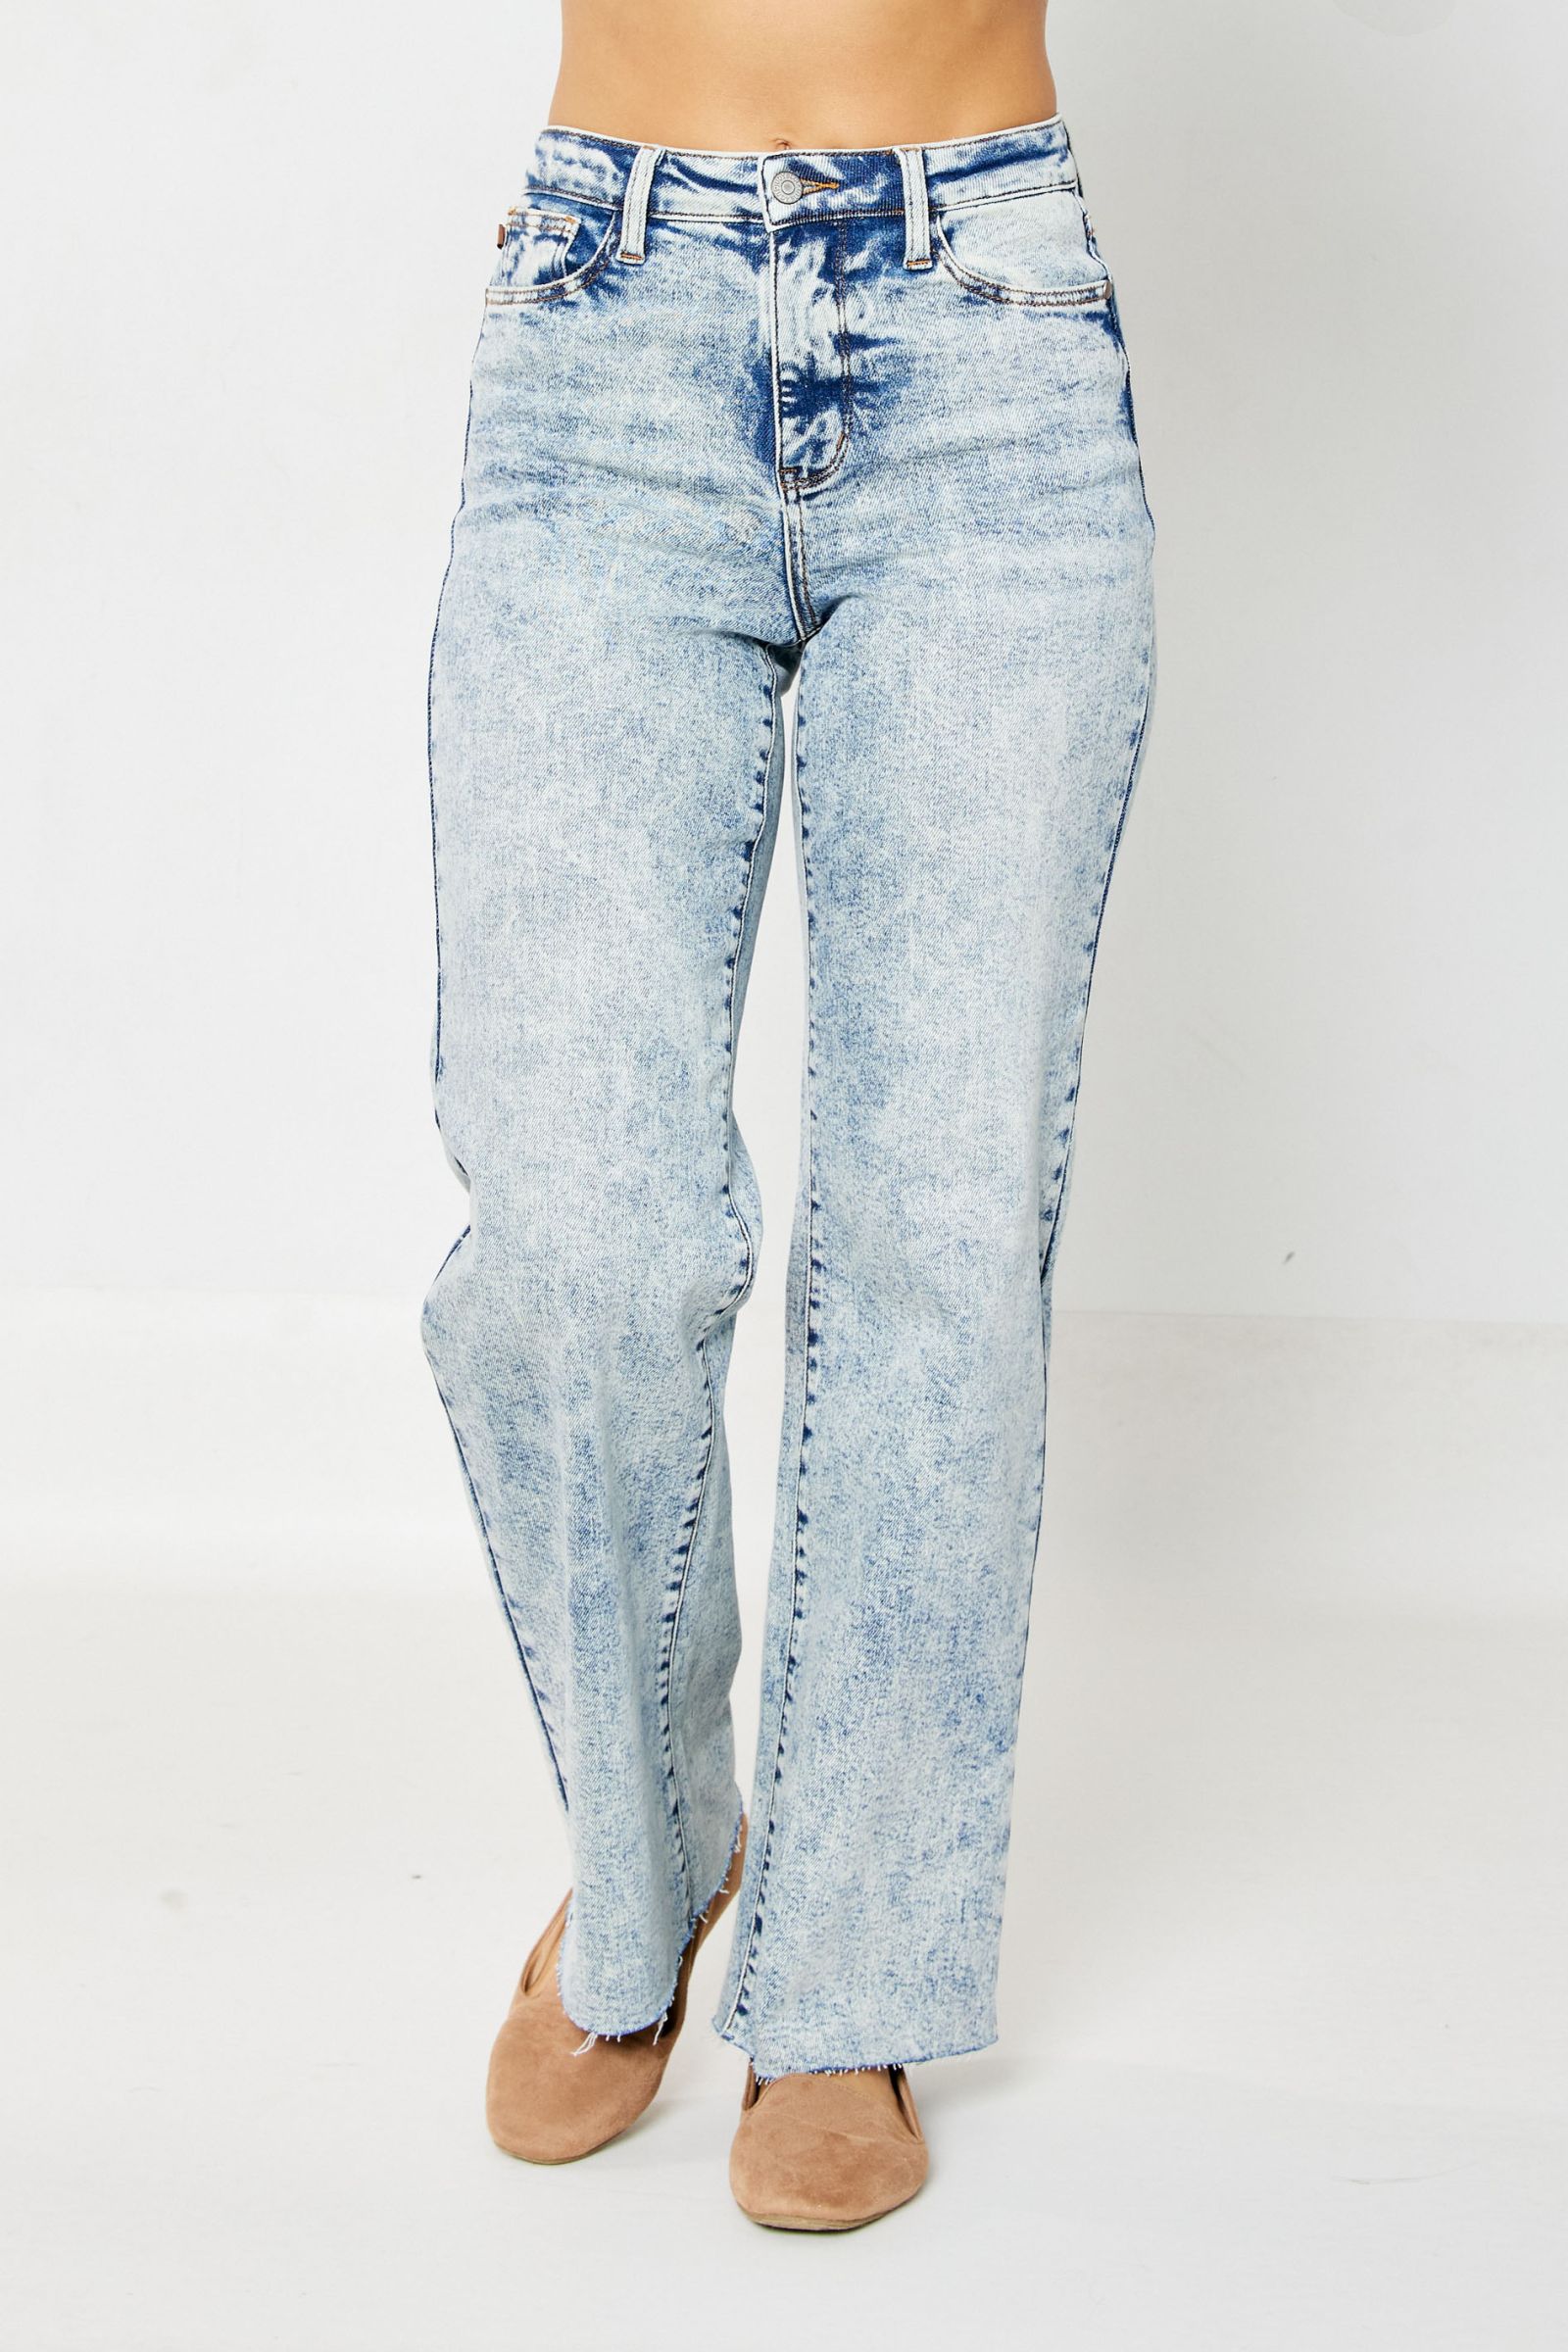 Raw Hem Jeans: The Must-Have Denim Trend for Women